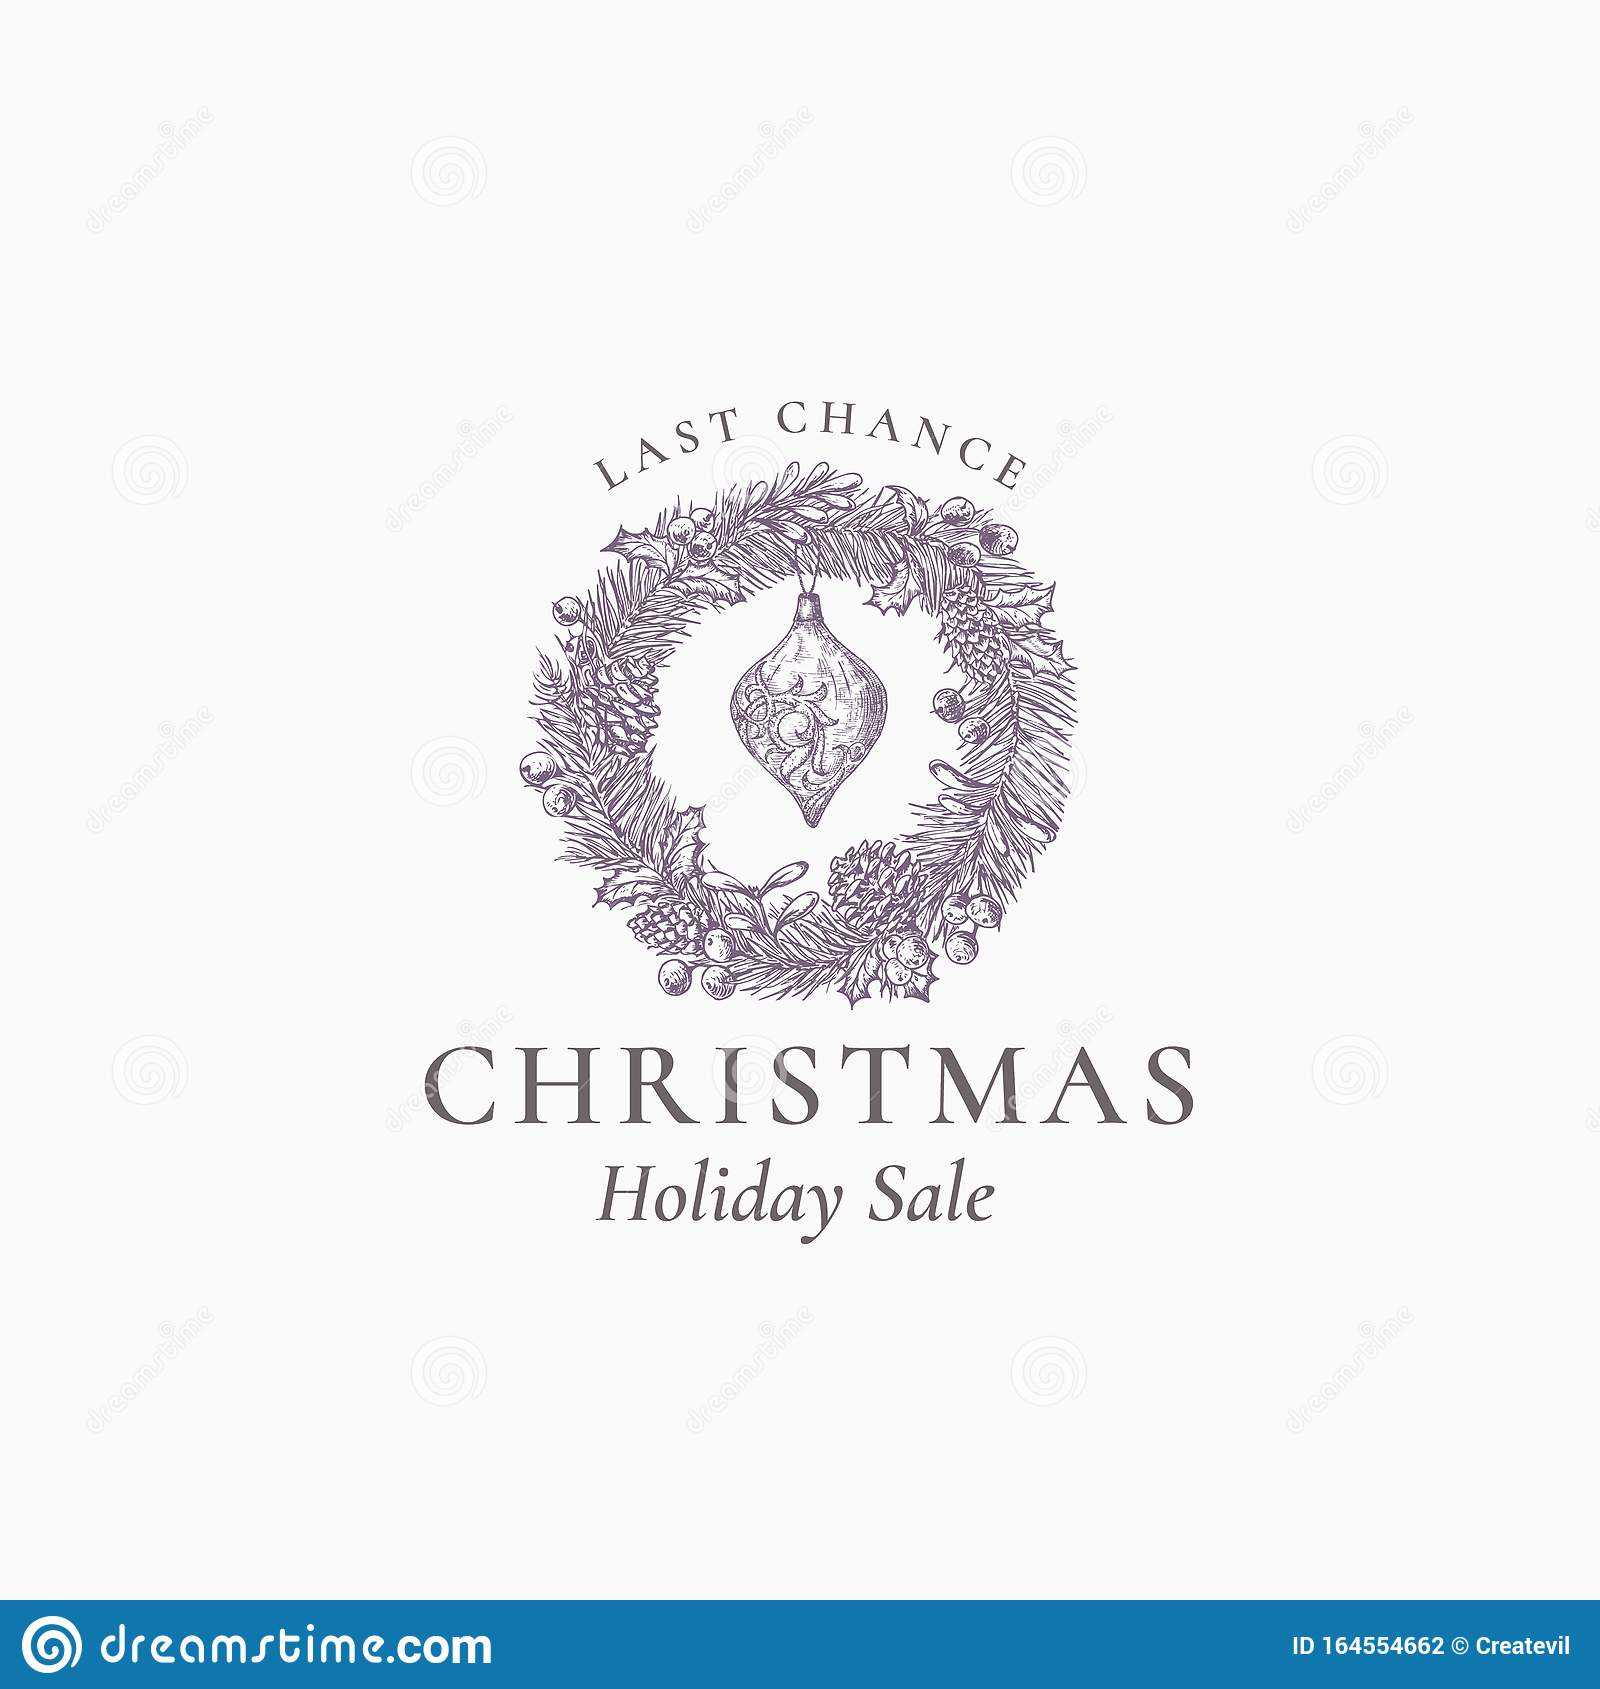 Last Chance Christmas Sale Discount Sketch Pine Wreath, Sign For Chance Card Template